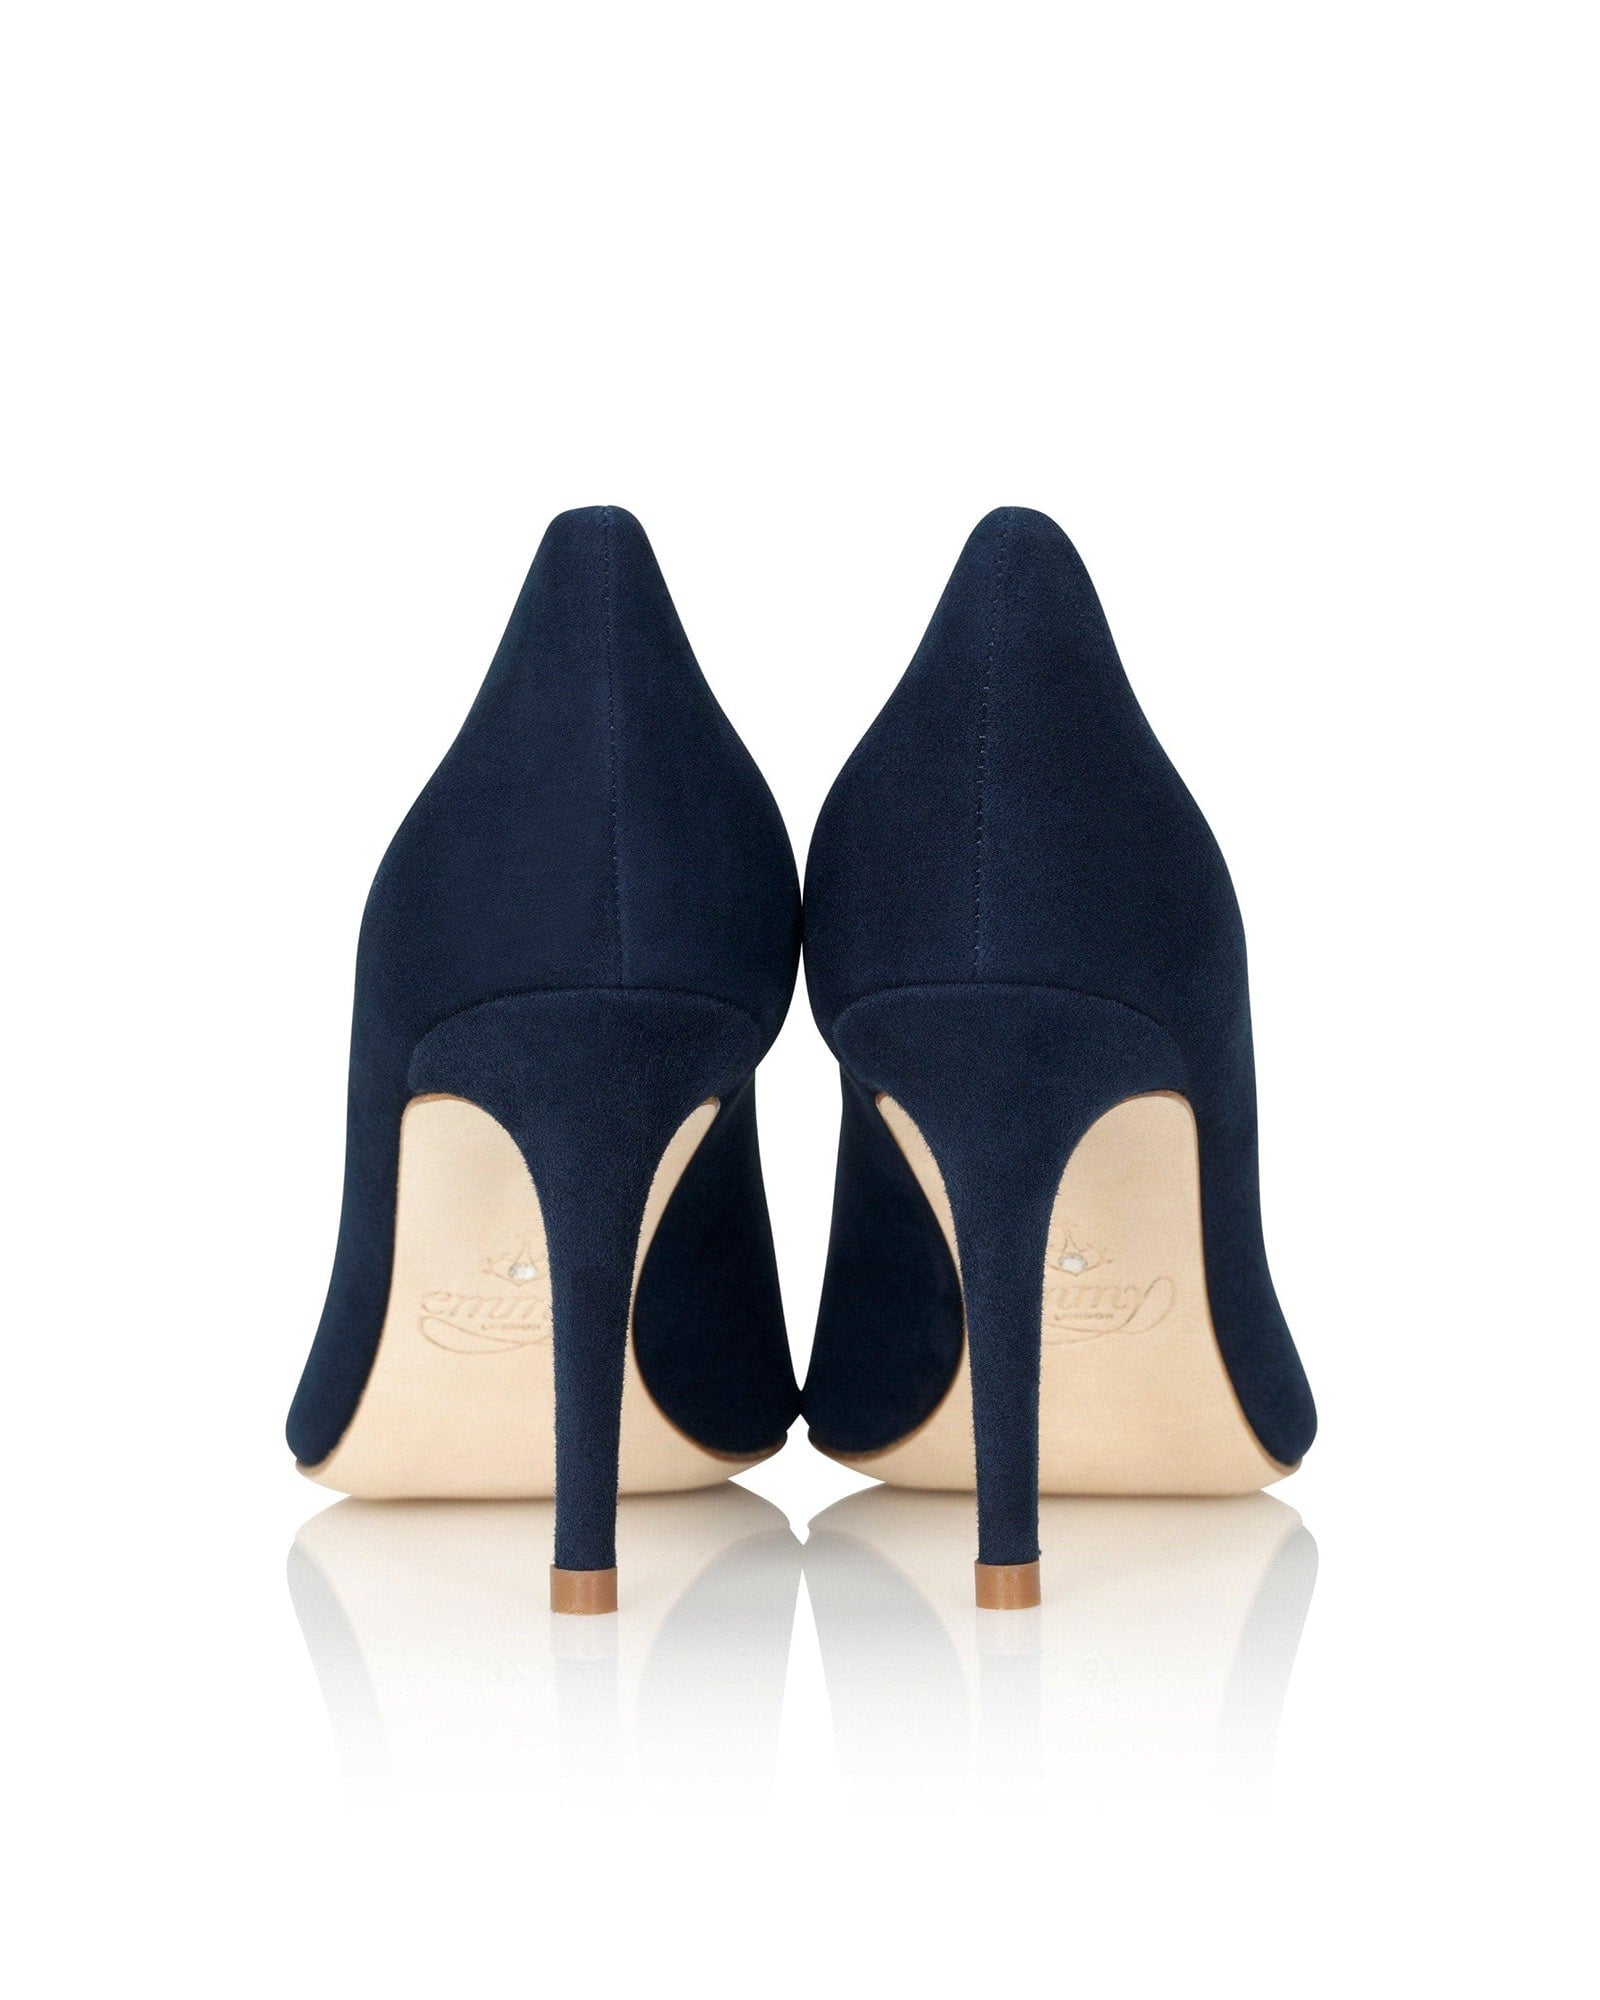 Claudia Midnight Navy Fashion Shoe Navy Blue Court Shoes  image